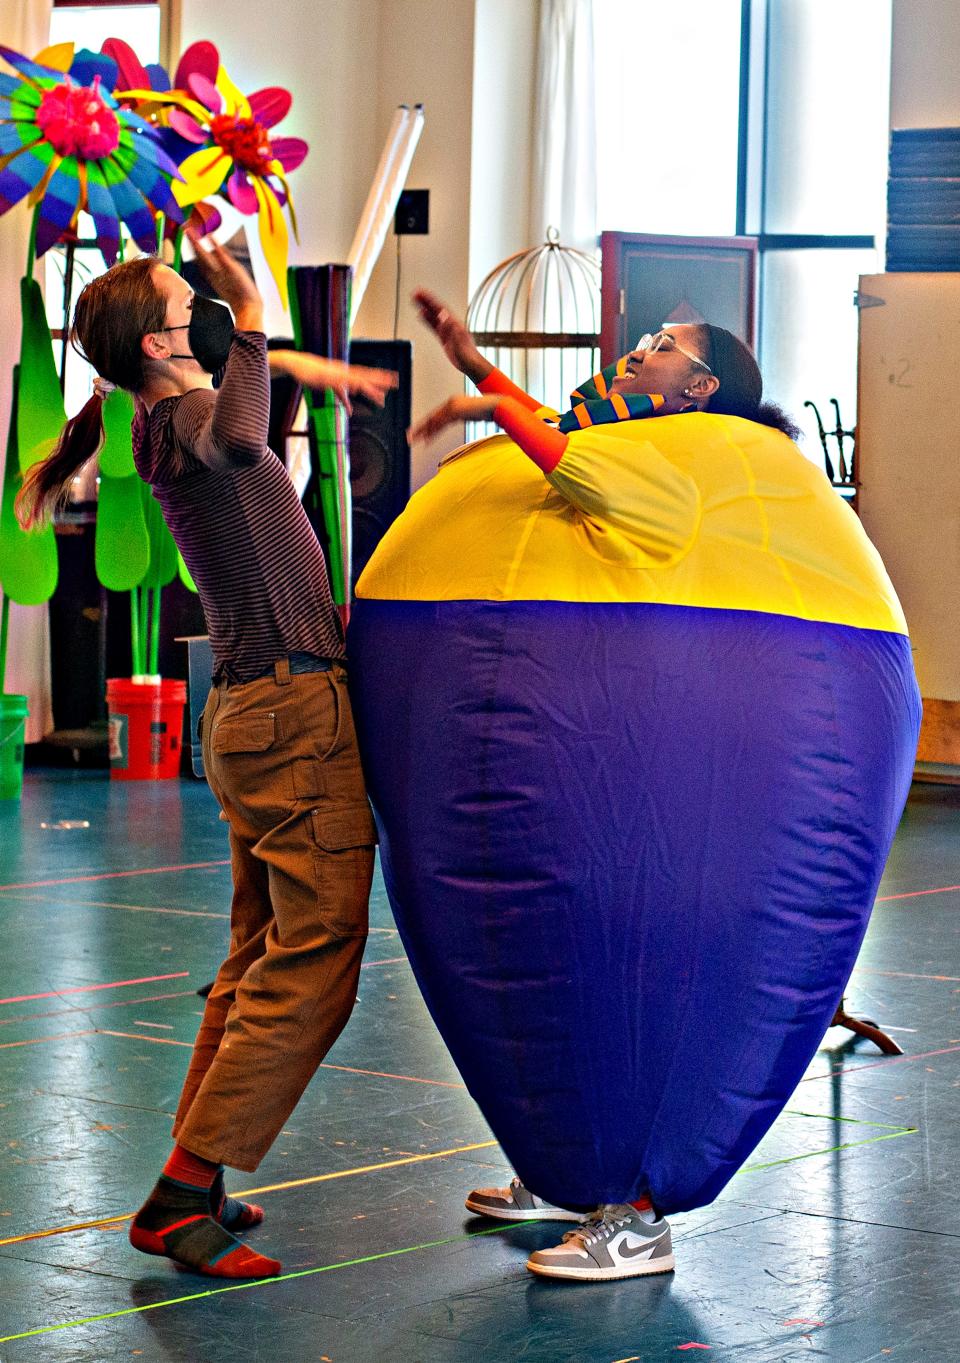 Keegan Robinson, left, as Tweedle Dee rehearses with Antonisia Collin of Montgomery in her inflatable suit as Tweedle Dum for "Alice in Wonderland" at Children's Theatre Company.